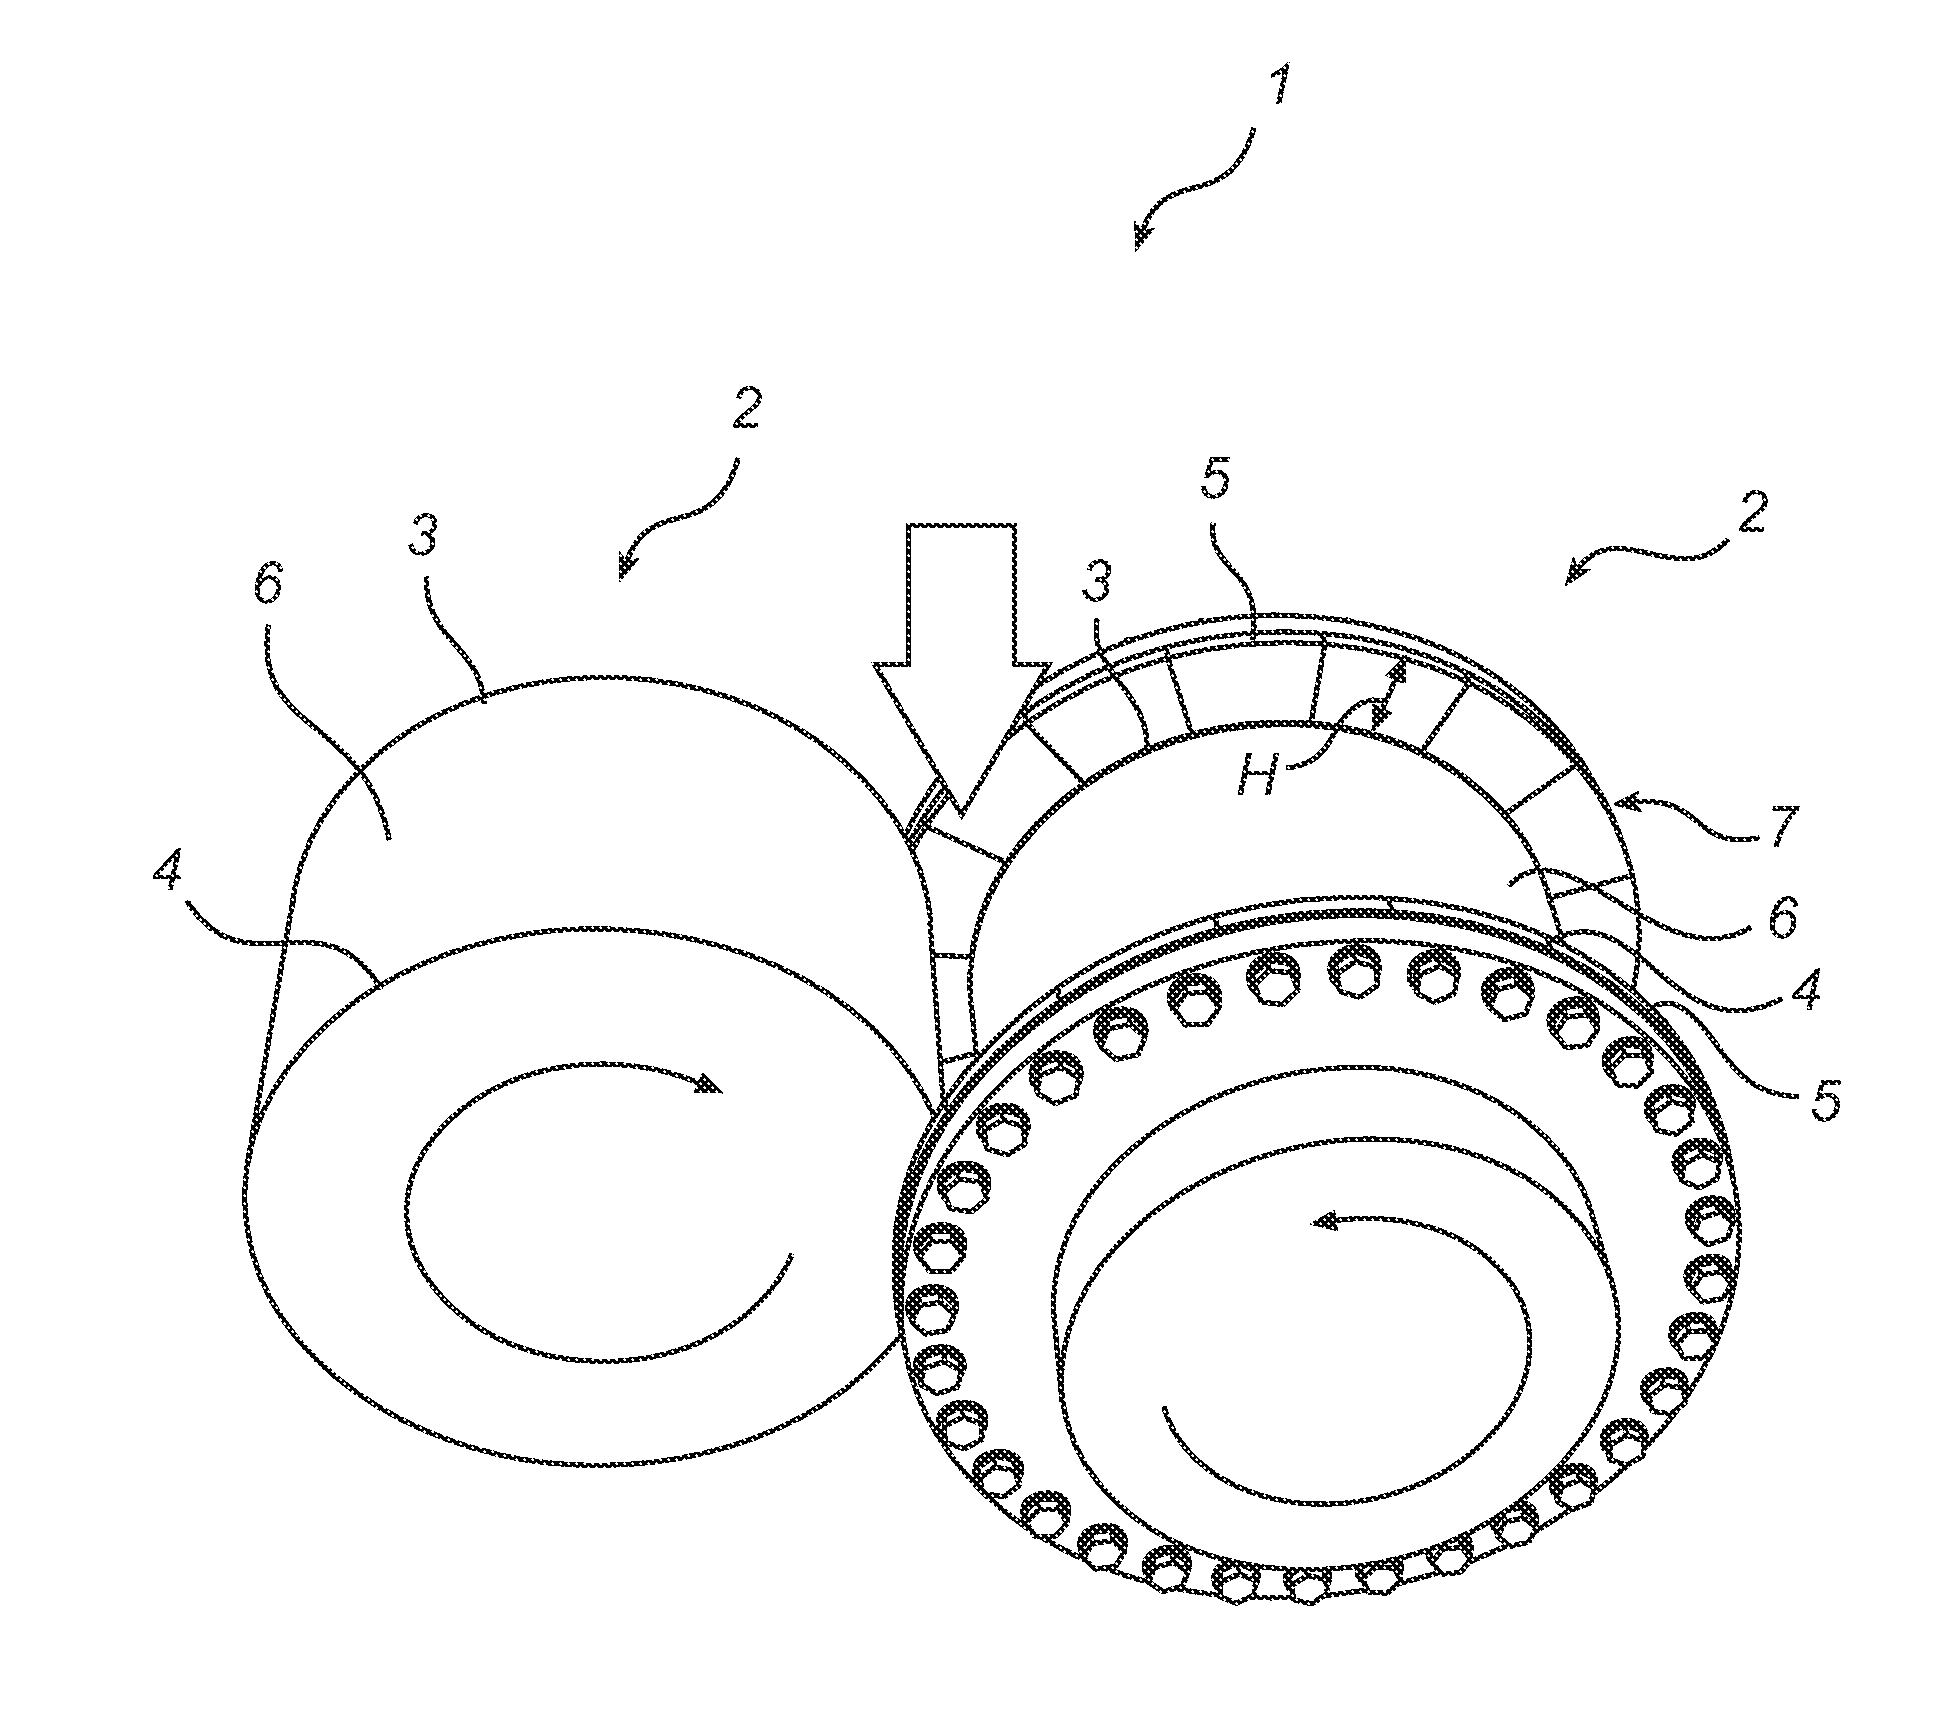 Roller crusher having at least one roller comprising a flange